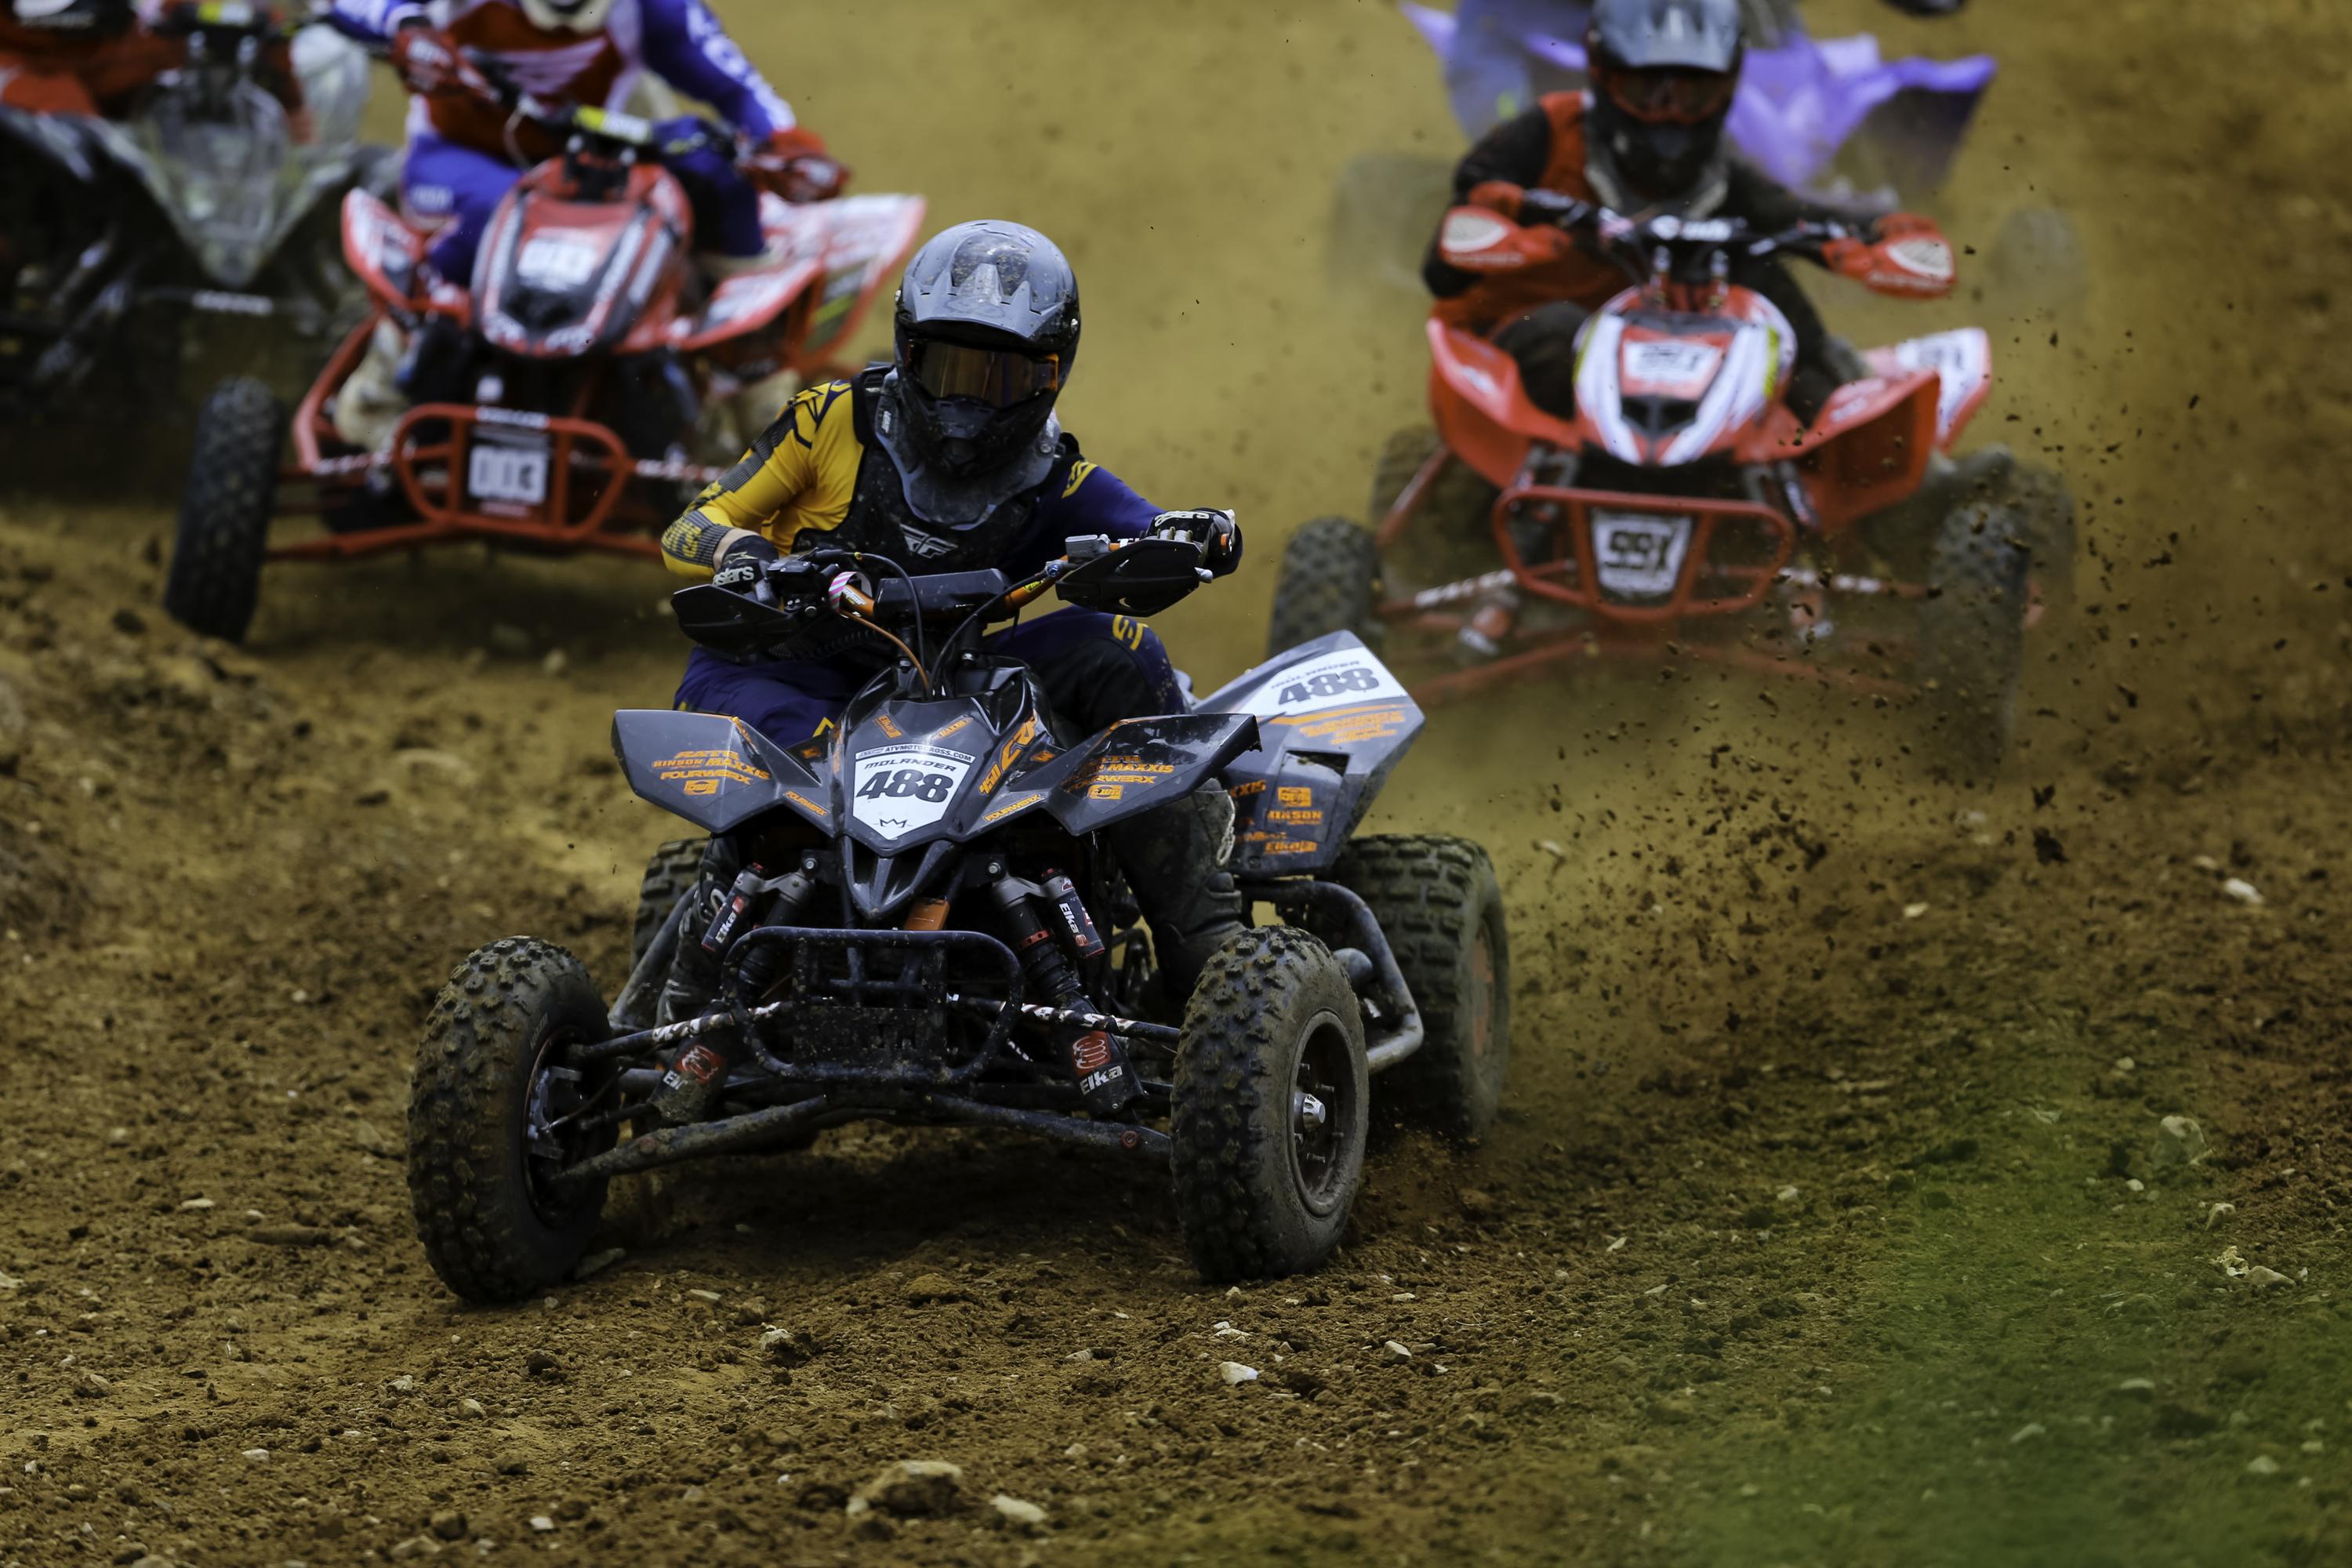 Competition Bulletin 2022-1: Final 2022 ATVMX Supplemental Rules and National Classes Now Posted